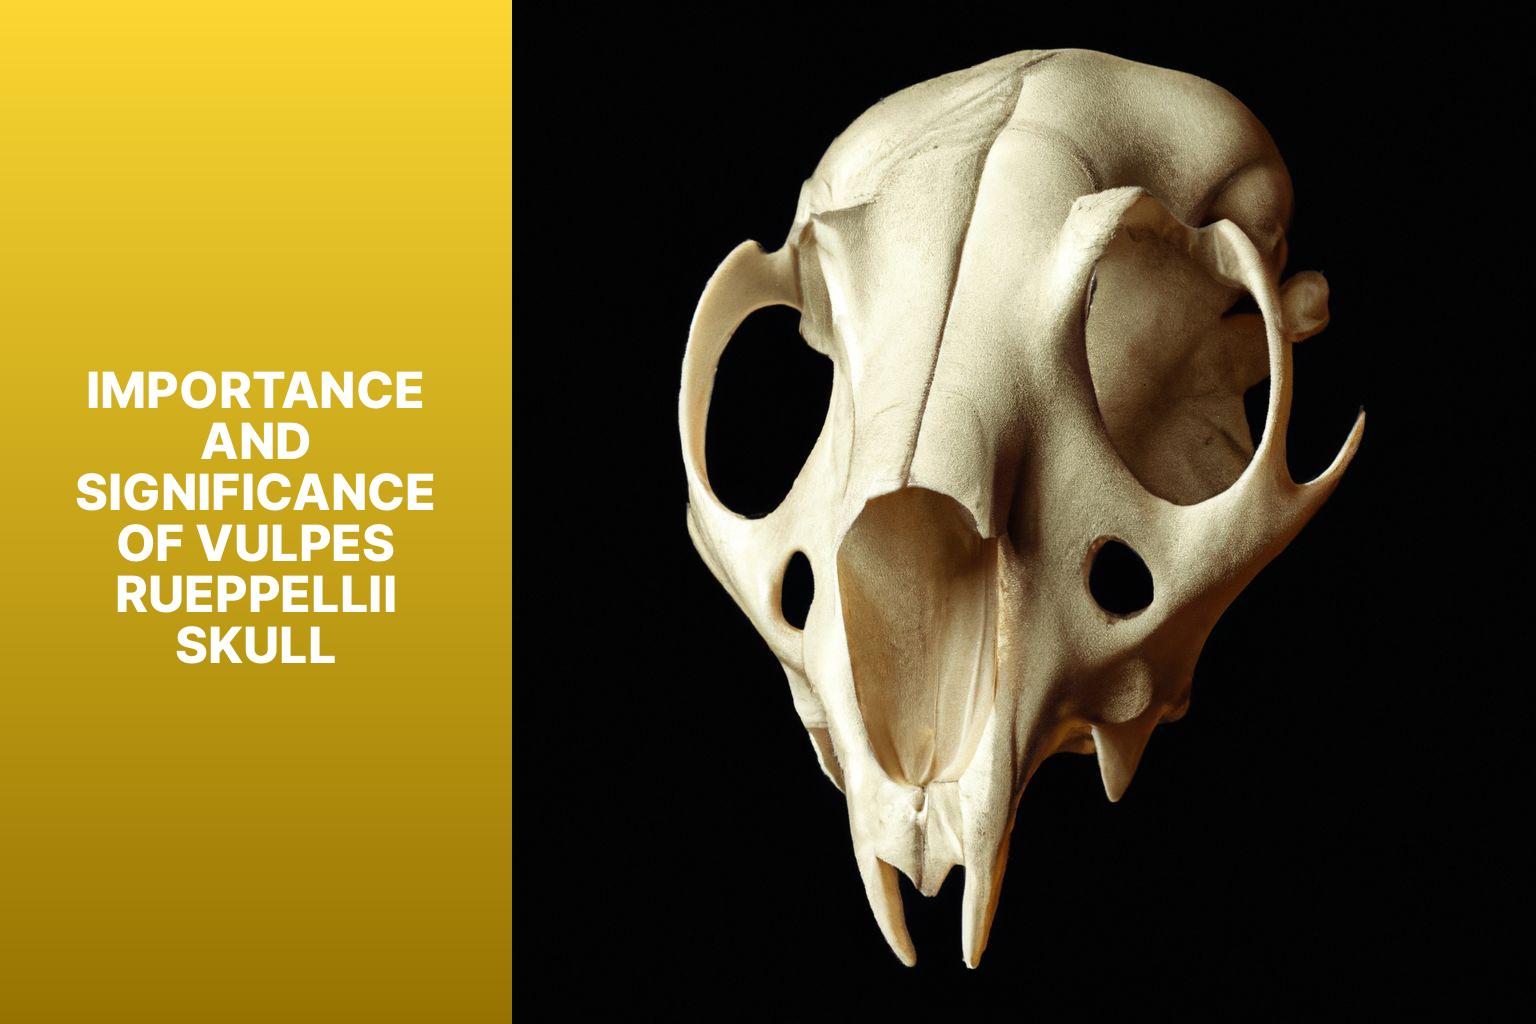 Importance and Significance of Vulpes rueppellii Skull - Vulpes rueppellii Skull 